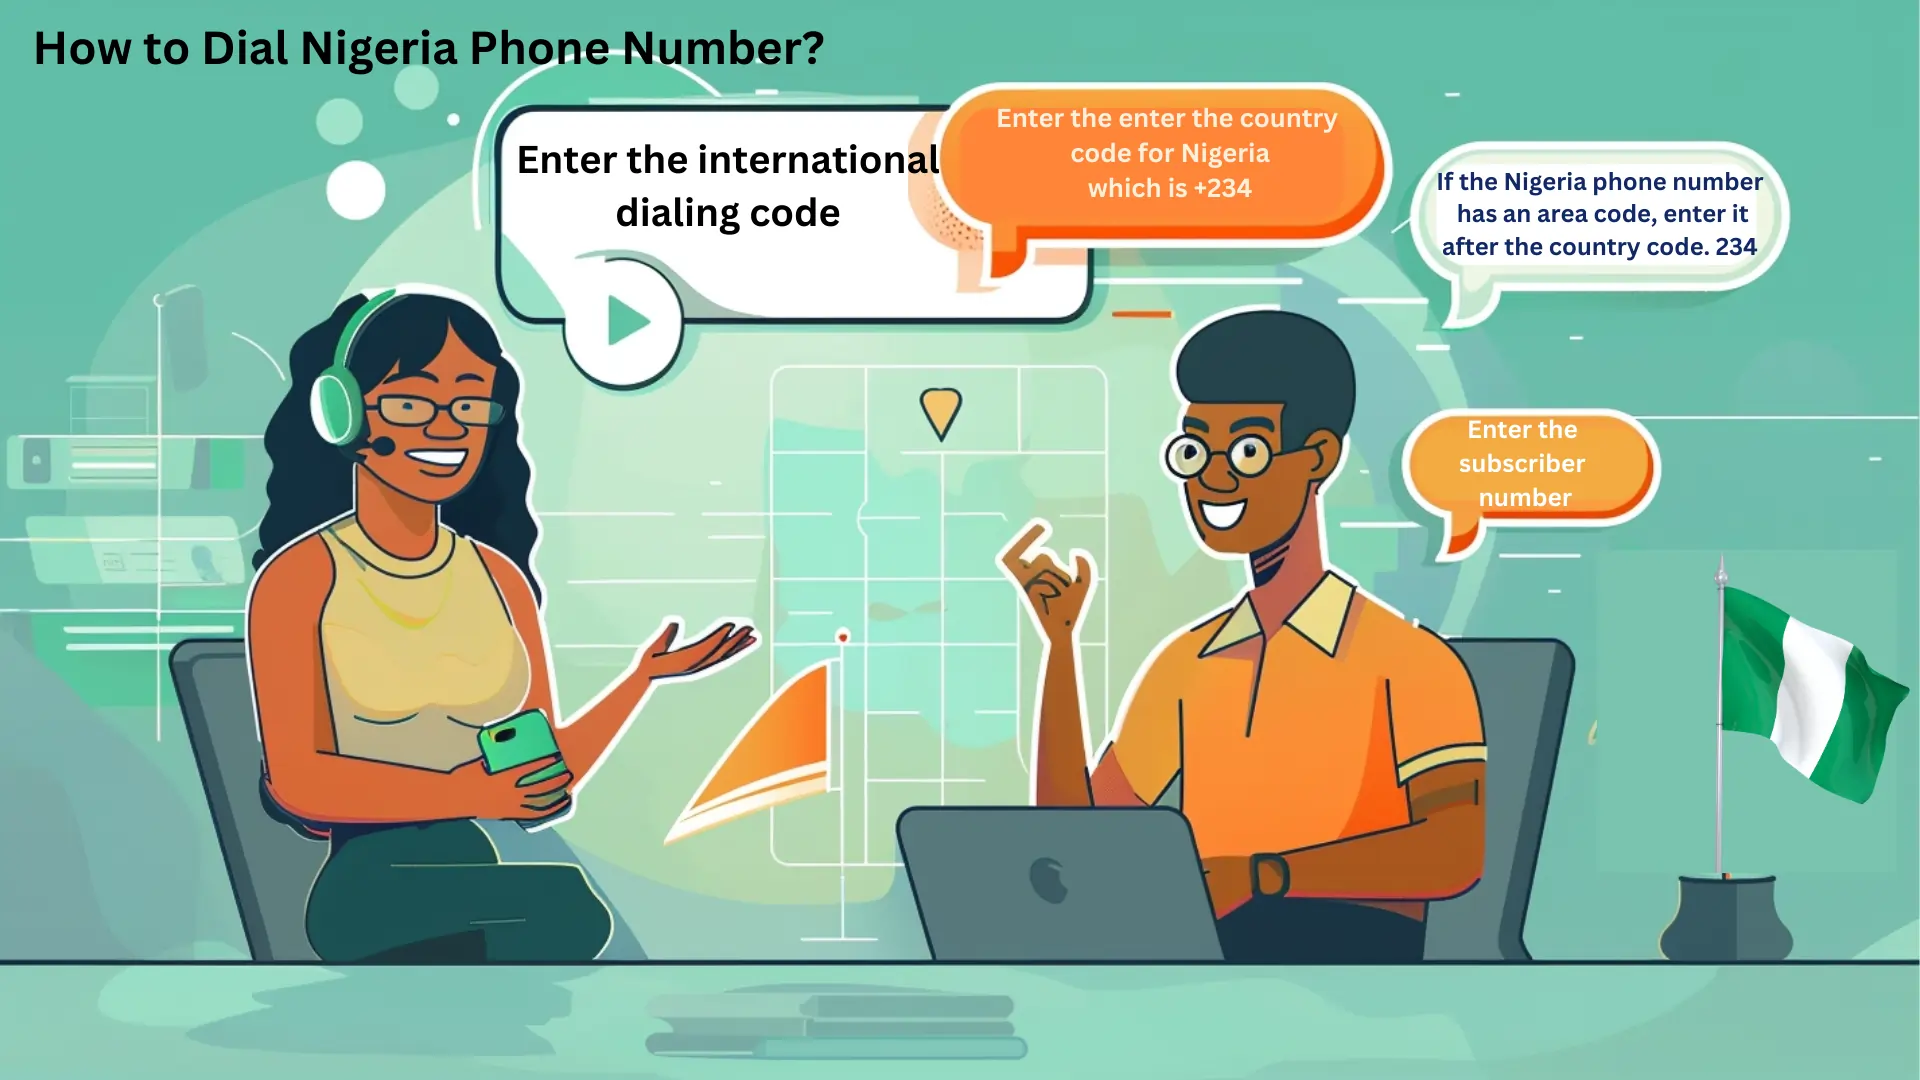 How to Dial Nigeria Phone Number?